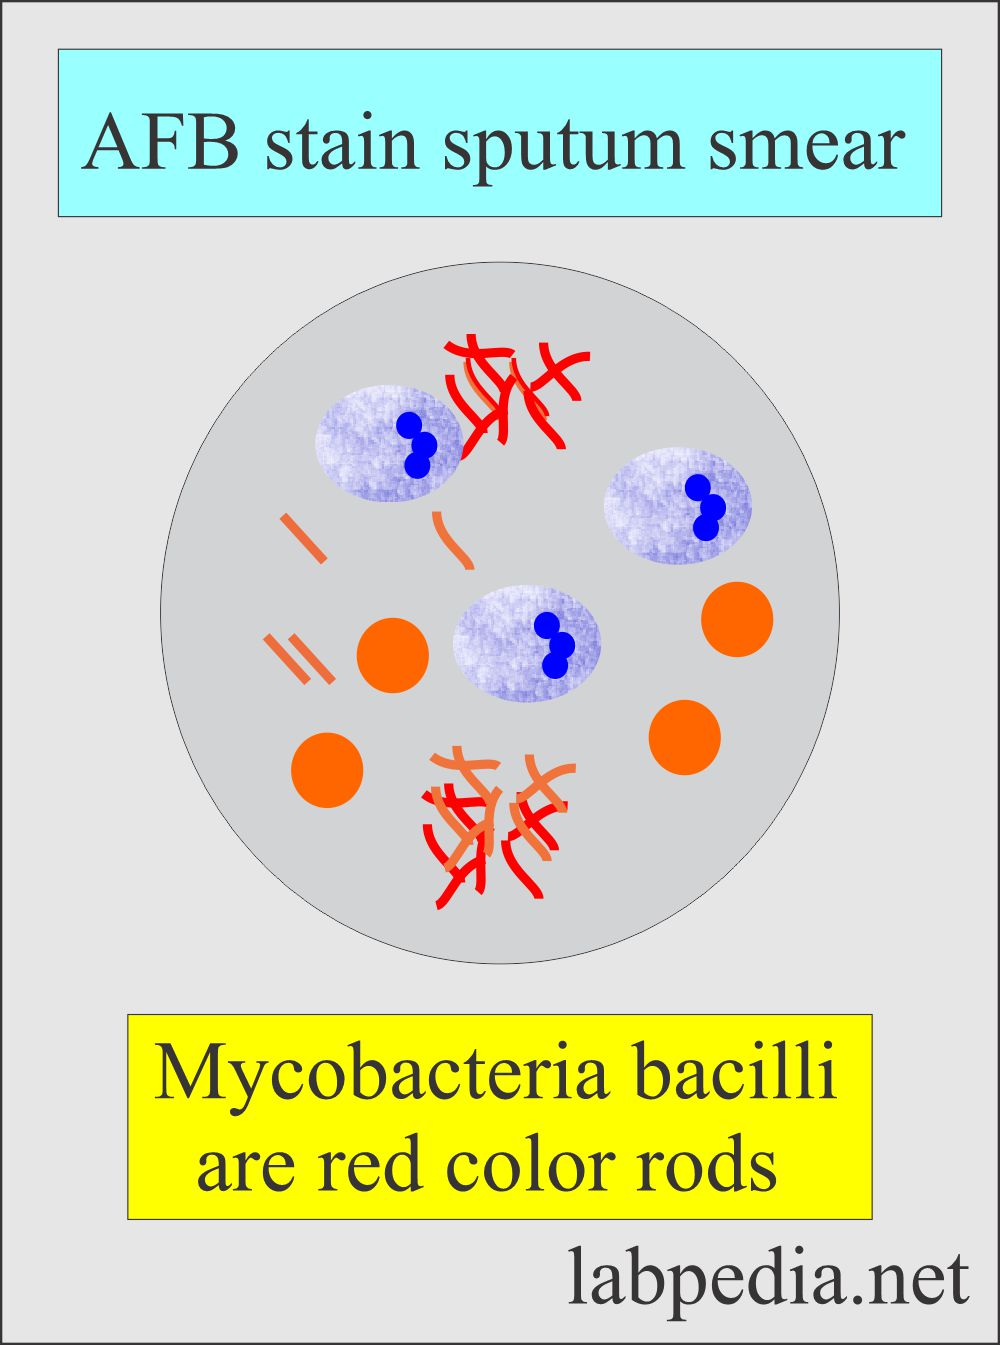 Pathozyme Tuberculosis test: TB bacilli with AFB stain